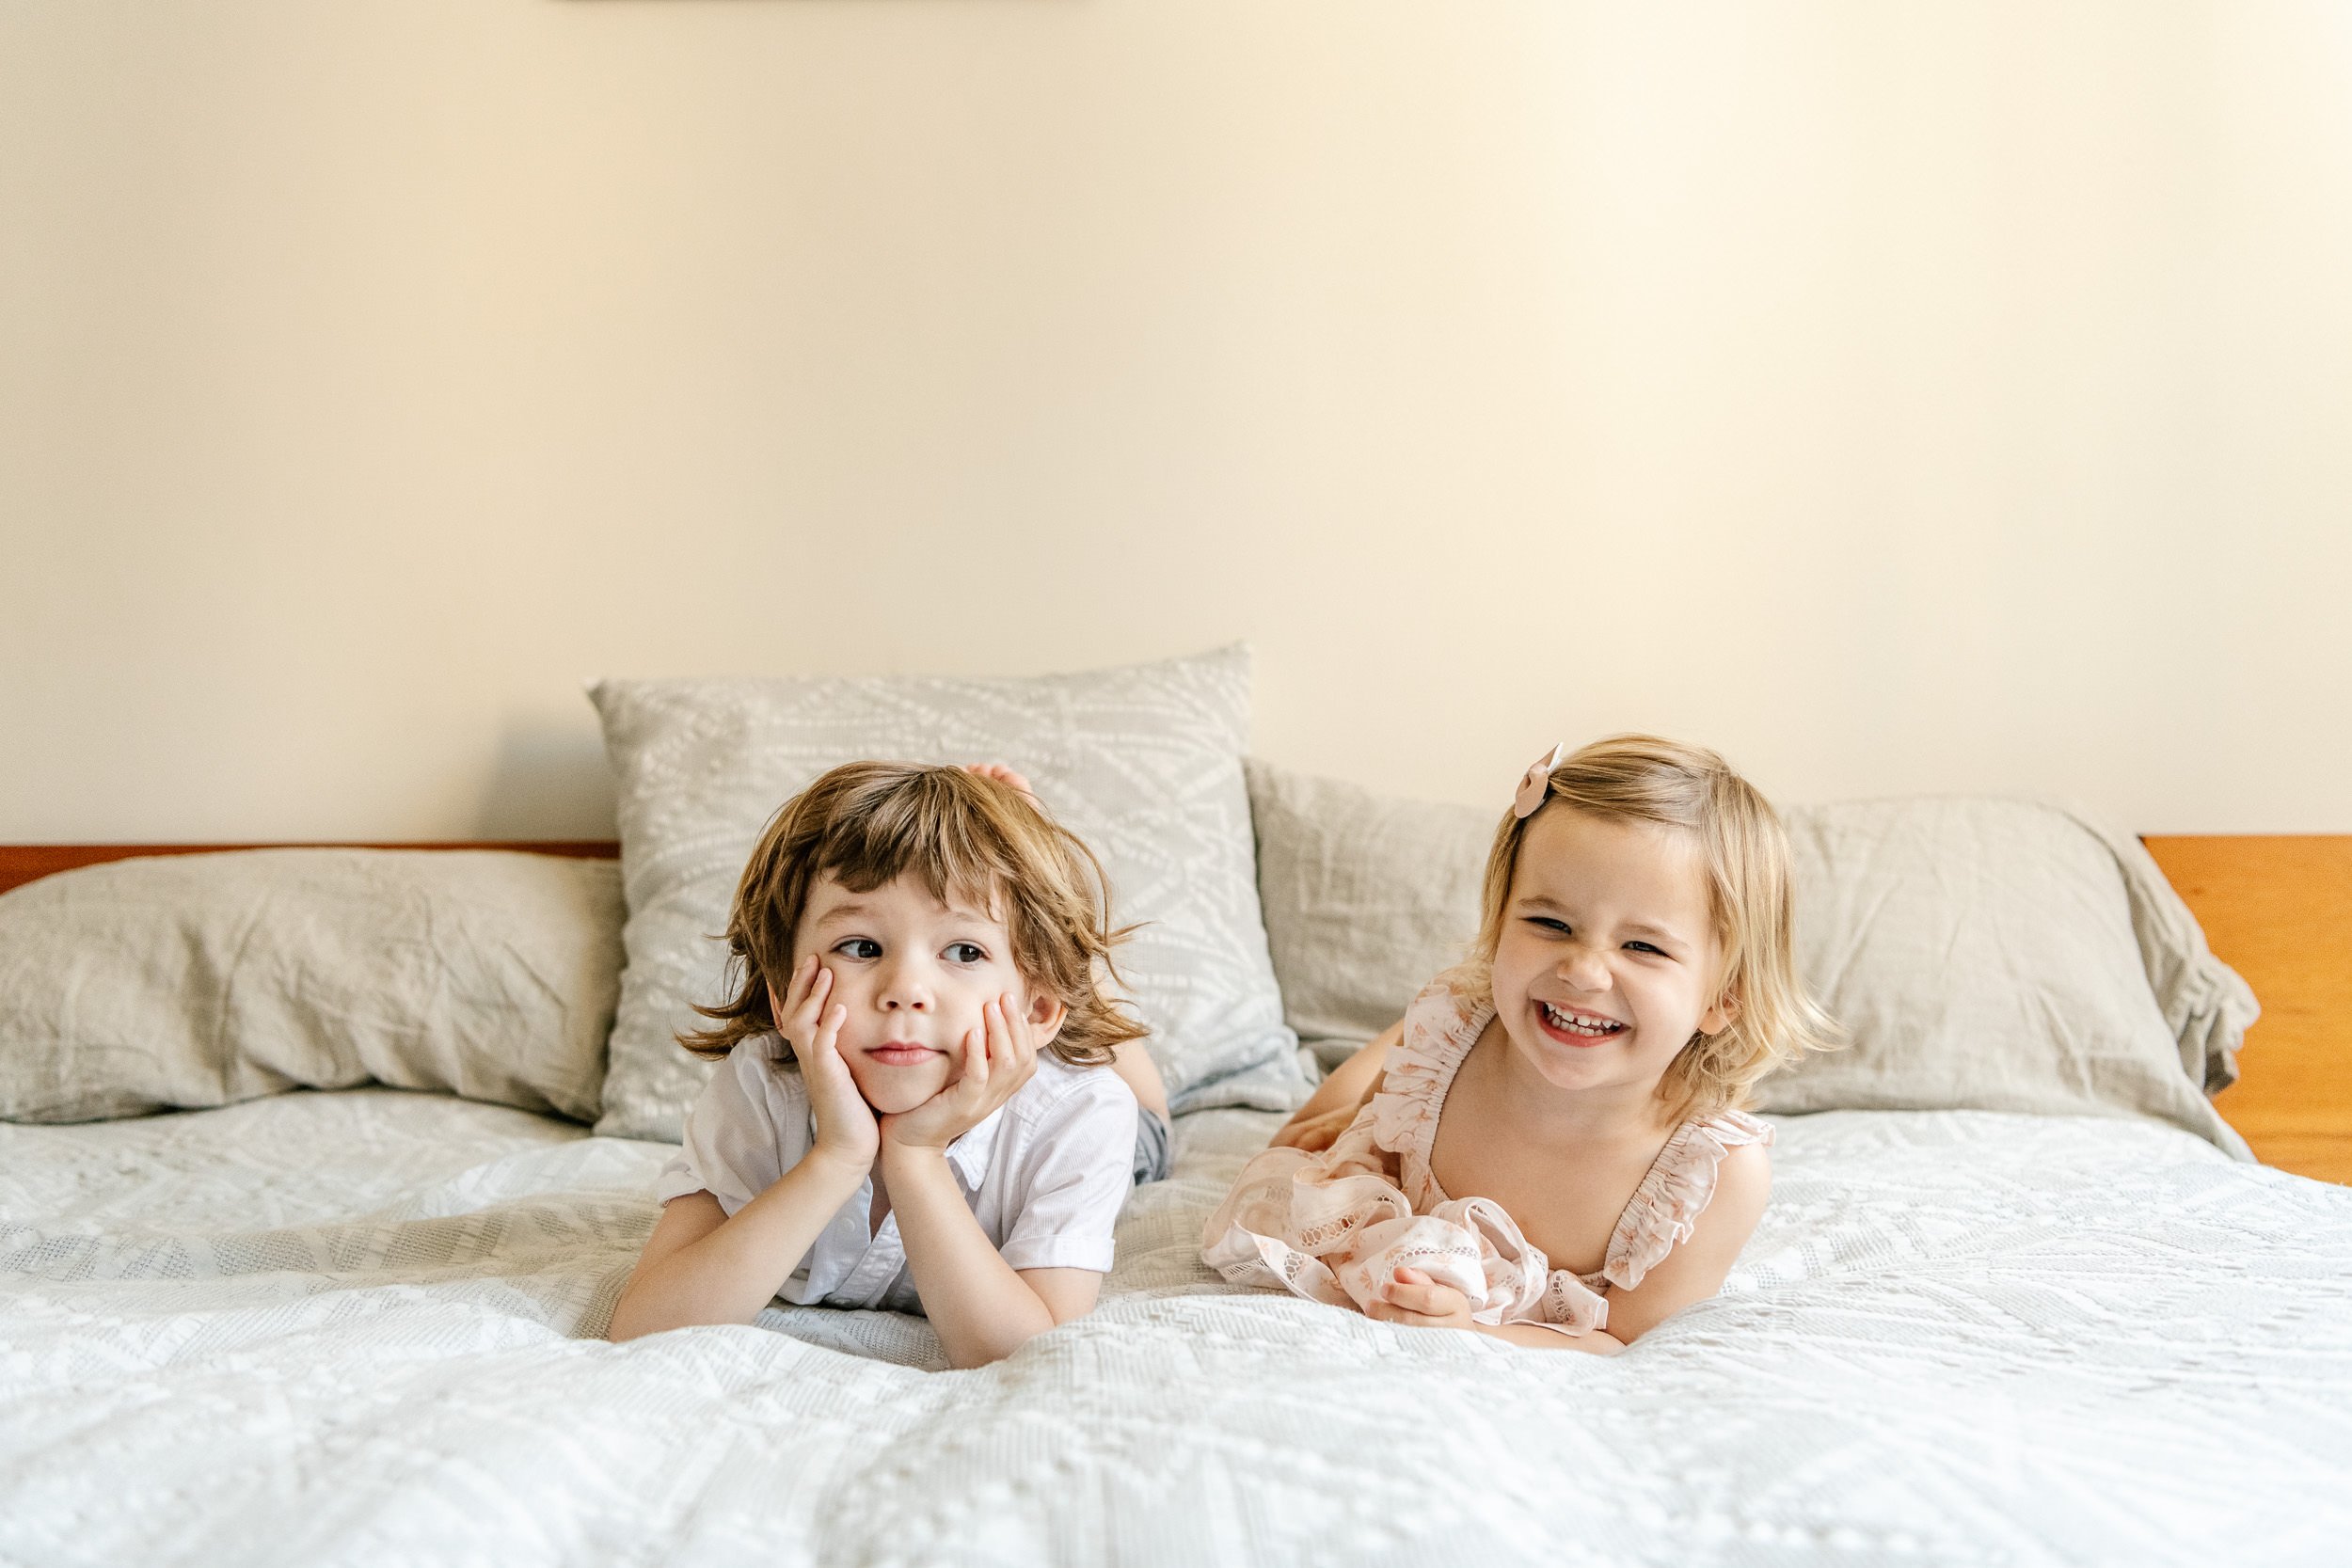  Two little kids laying on a bed together laughing by Nicole Hawkins Photography. modern simple portraits for kids #NicoleHawkinsPhotograaphy #NicoleHawkinsChildren #NewYorkPortraits #KidsinNewYork #ChildrensPortraits #lifestyleportraits 